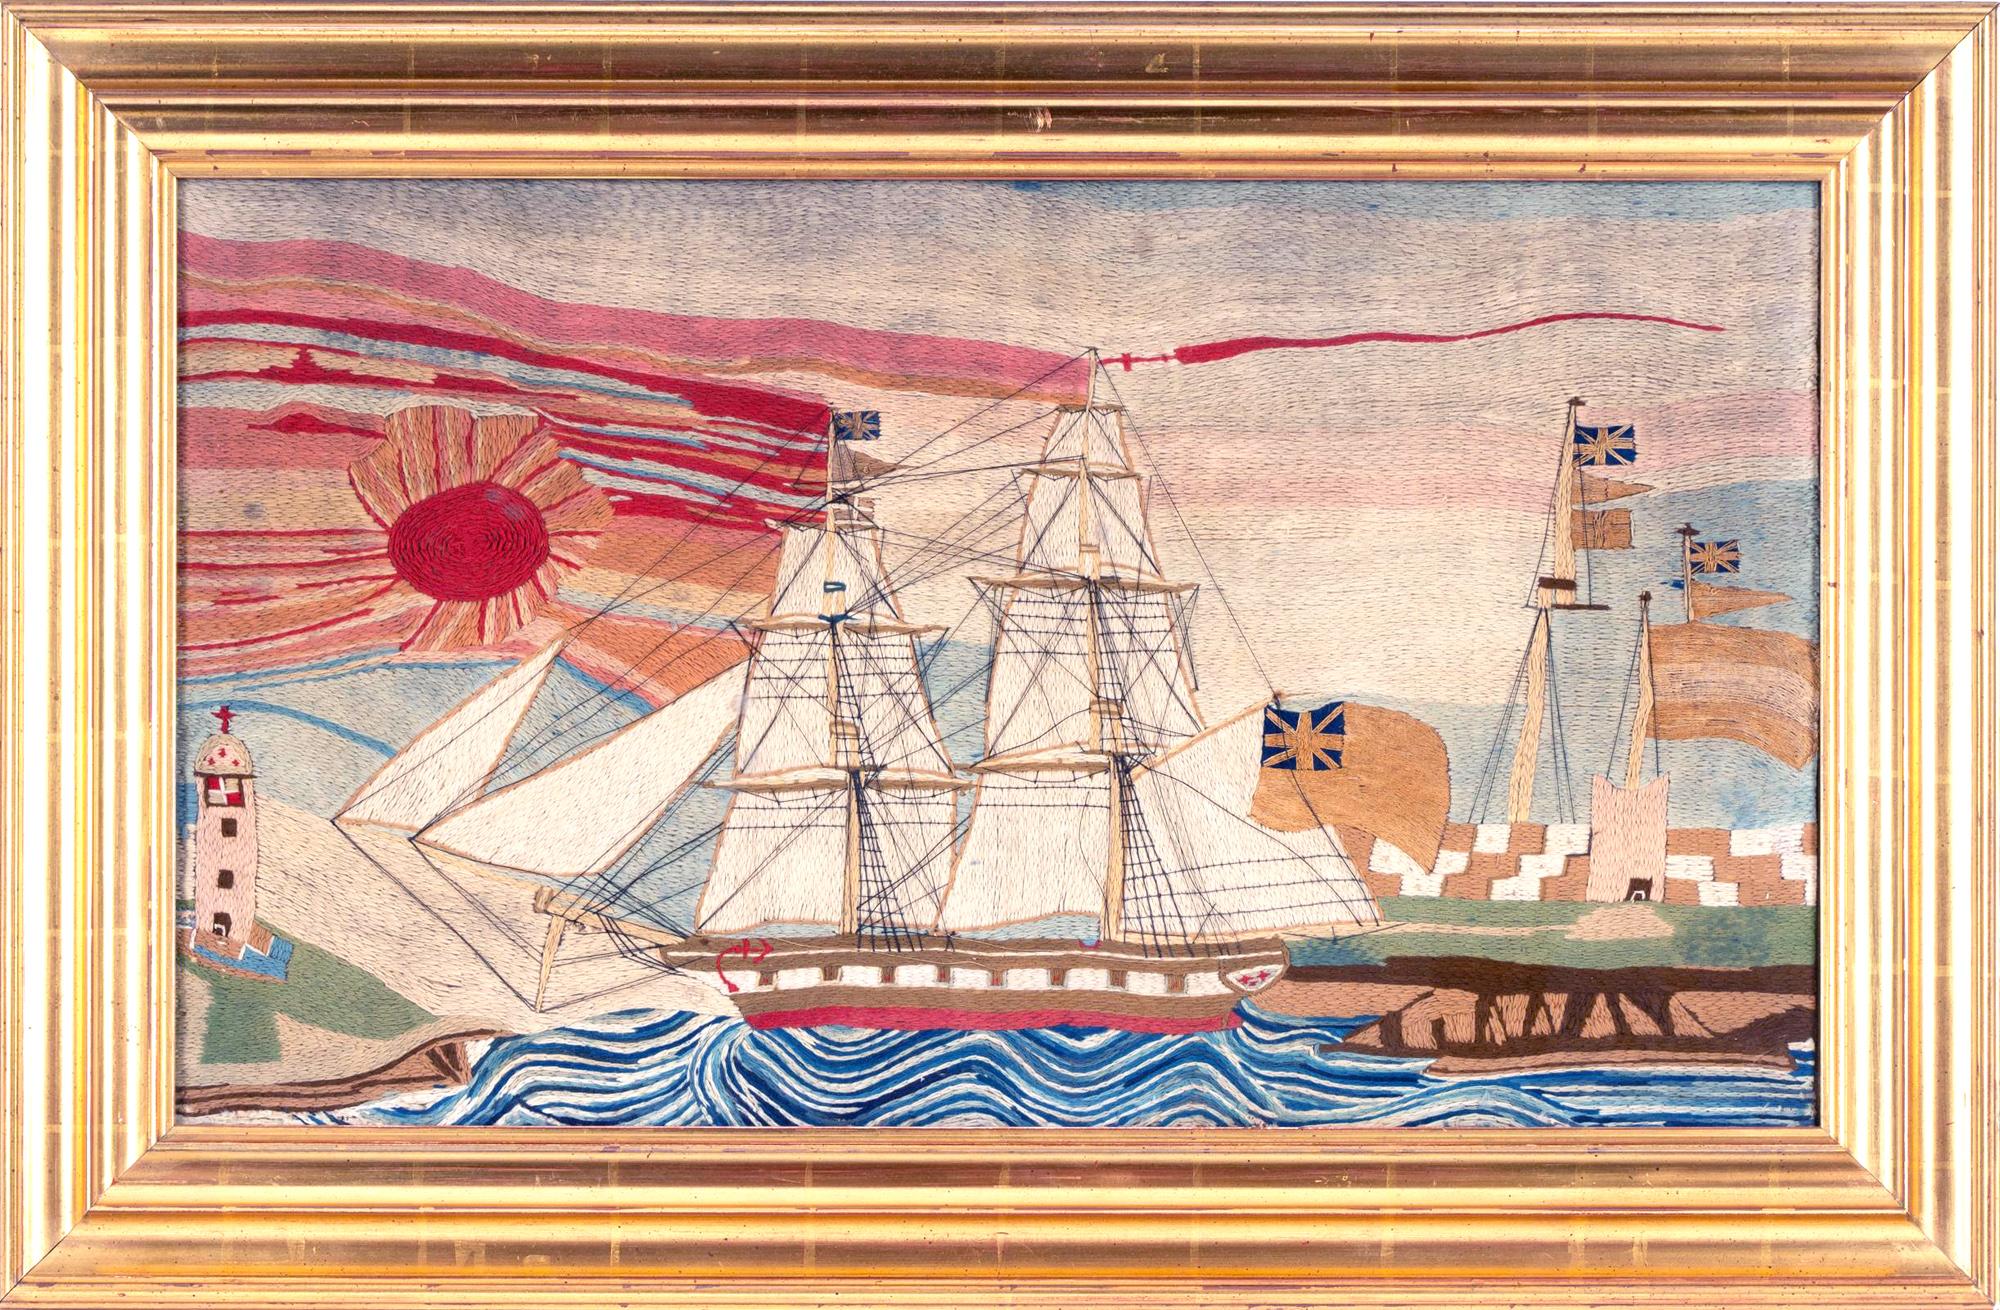 British Sailor's Woolwork Picture of a Royal Navy ship passing land with the sun setting in the background,
Circa 1870-80

The British sailor's woolie depicts a portside view of a Royal Navy Frigate flying the Red Ensign under full sail passing